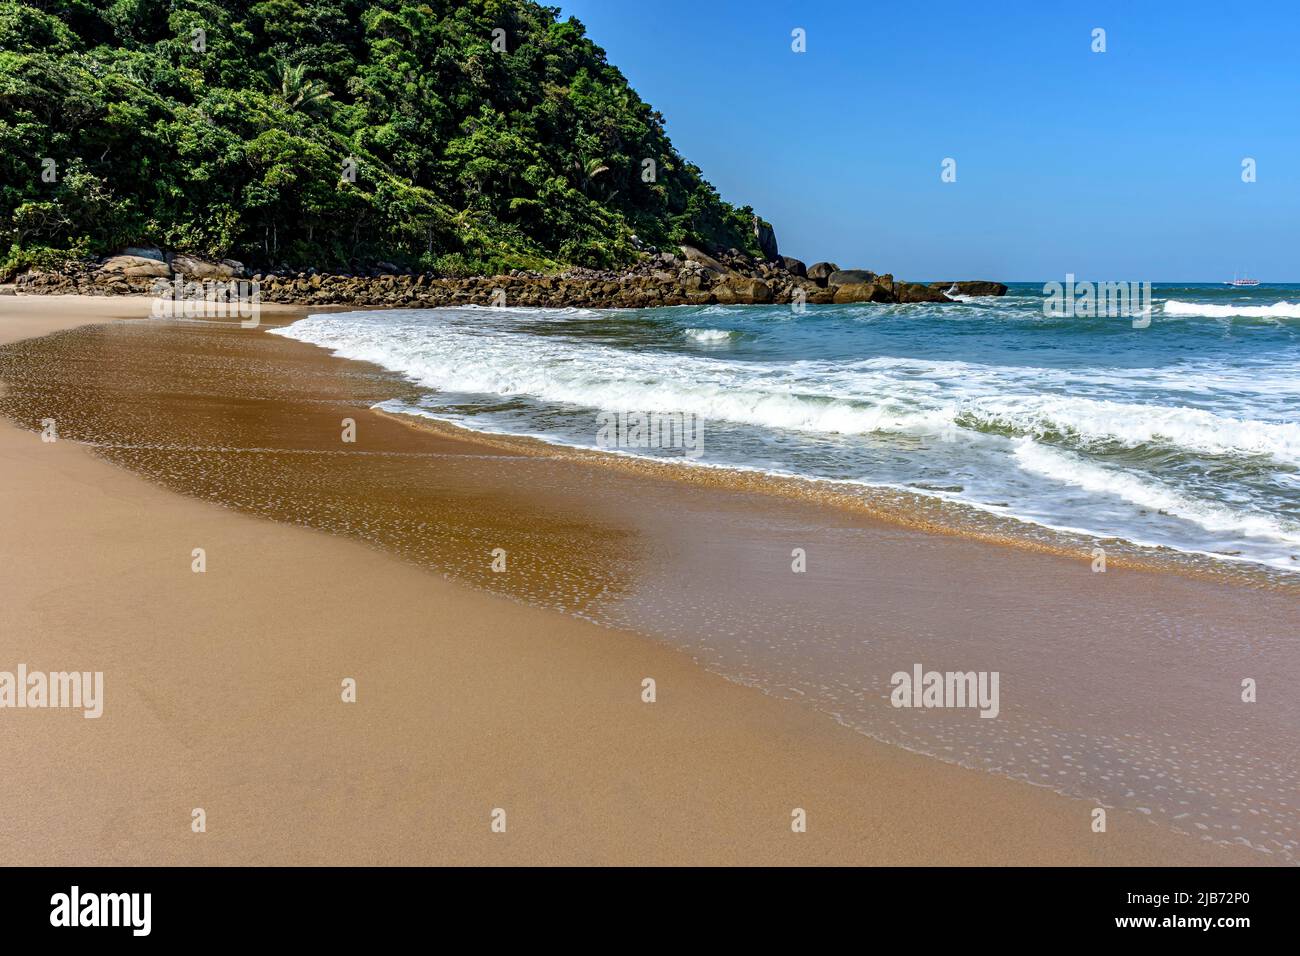 Paradisiacal rocky beach with clean and calm waters surrounded by forest and hills in Bertioga coast of Sao Paulo state, Brazil Stock Photo